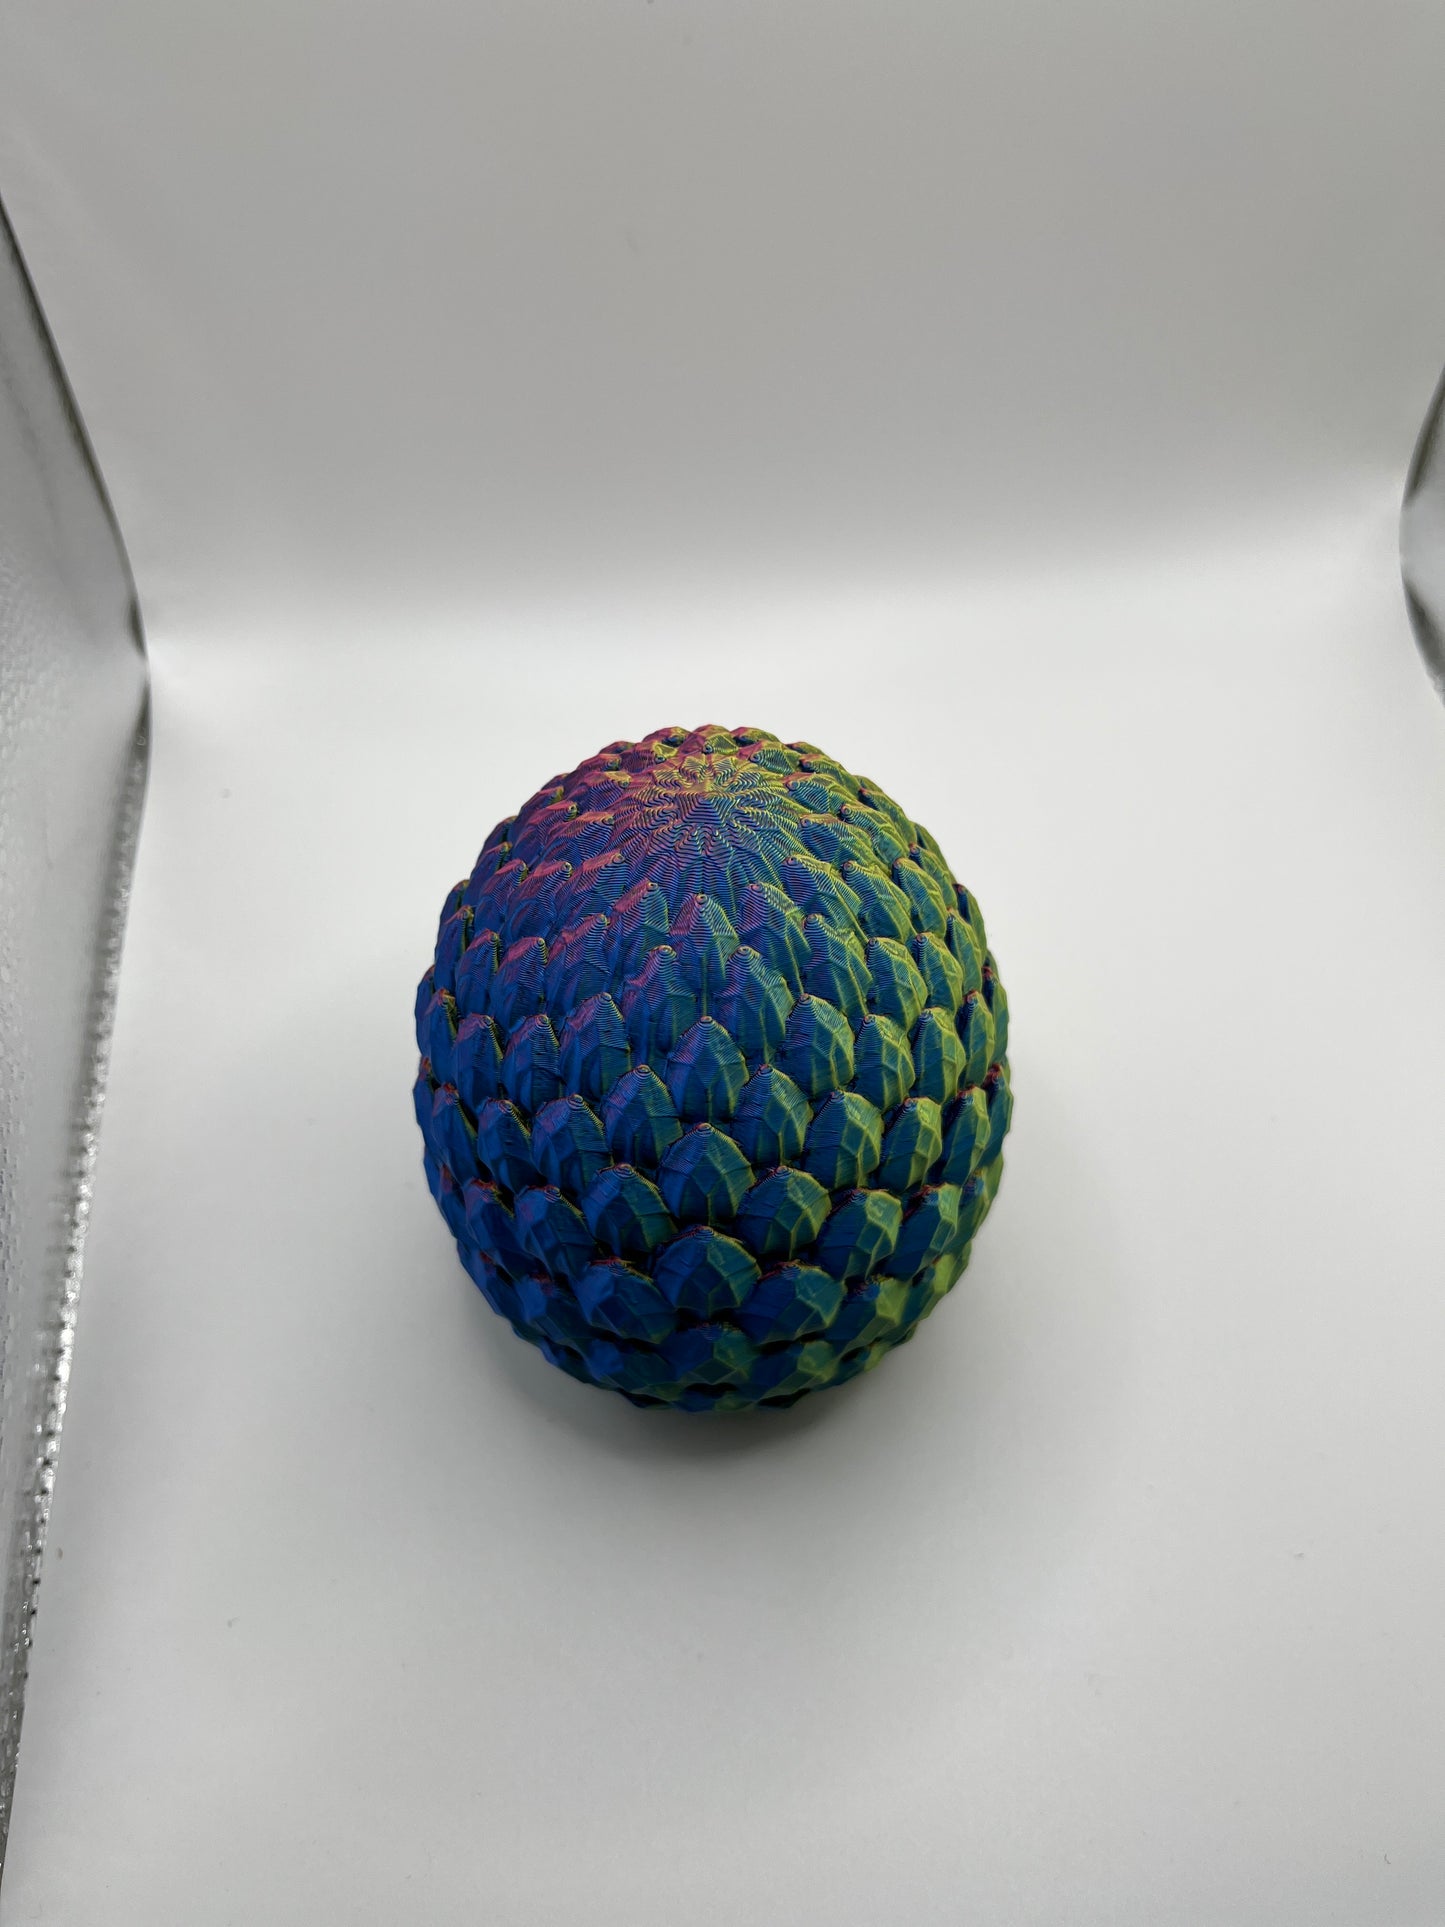 Dragon Eggs with Dragons inside!!